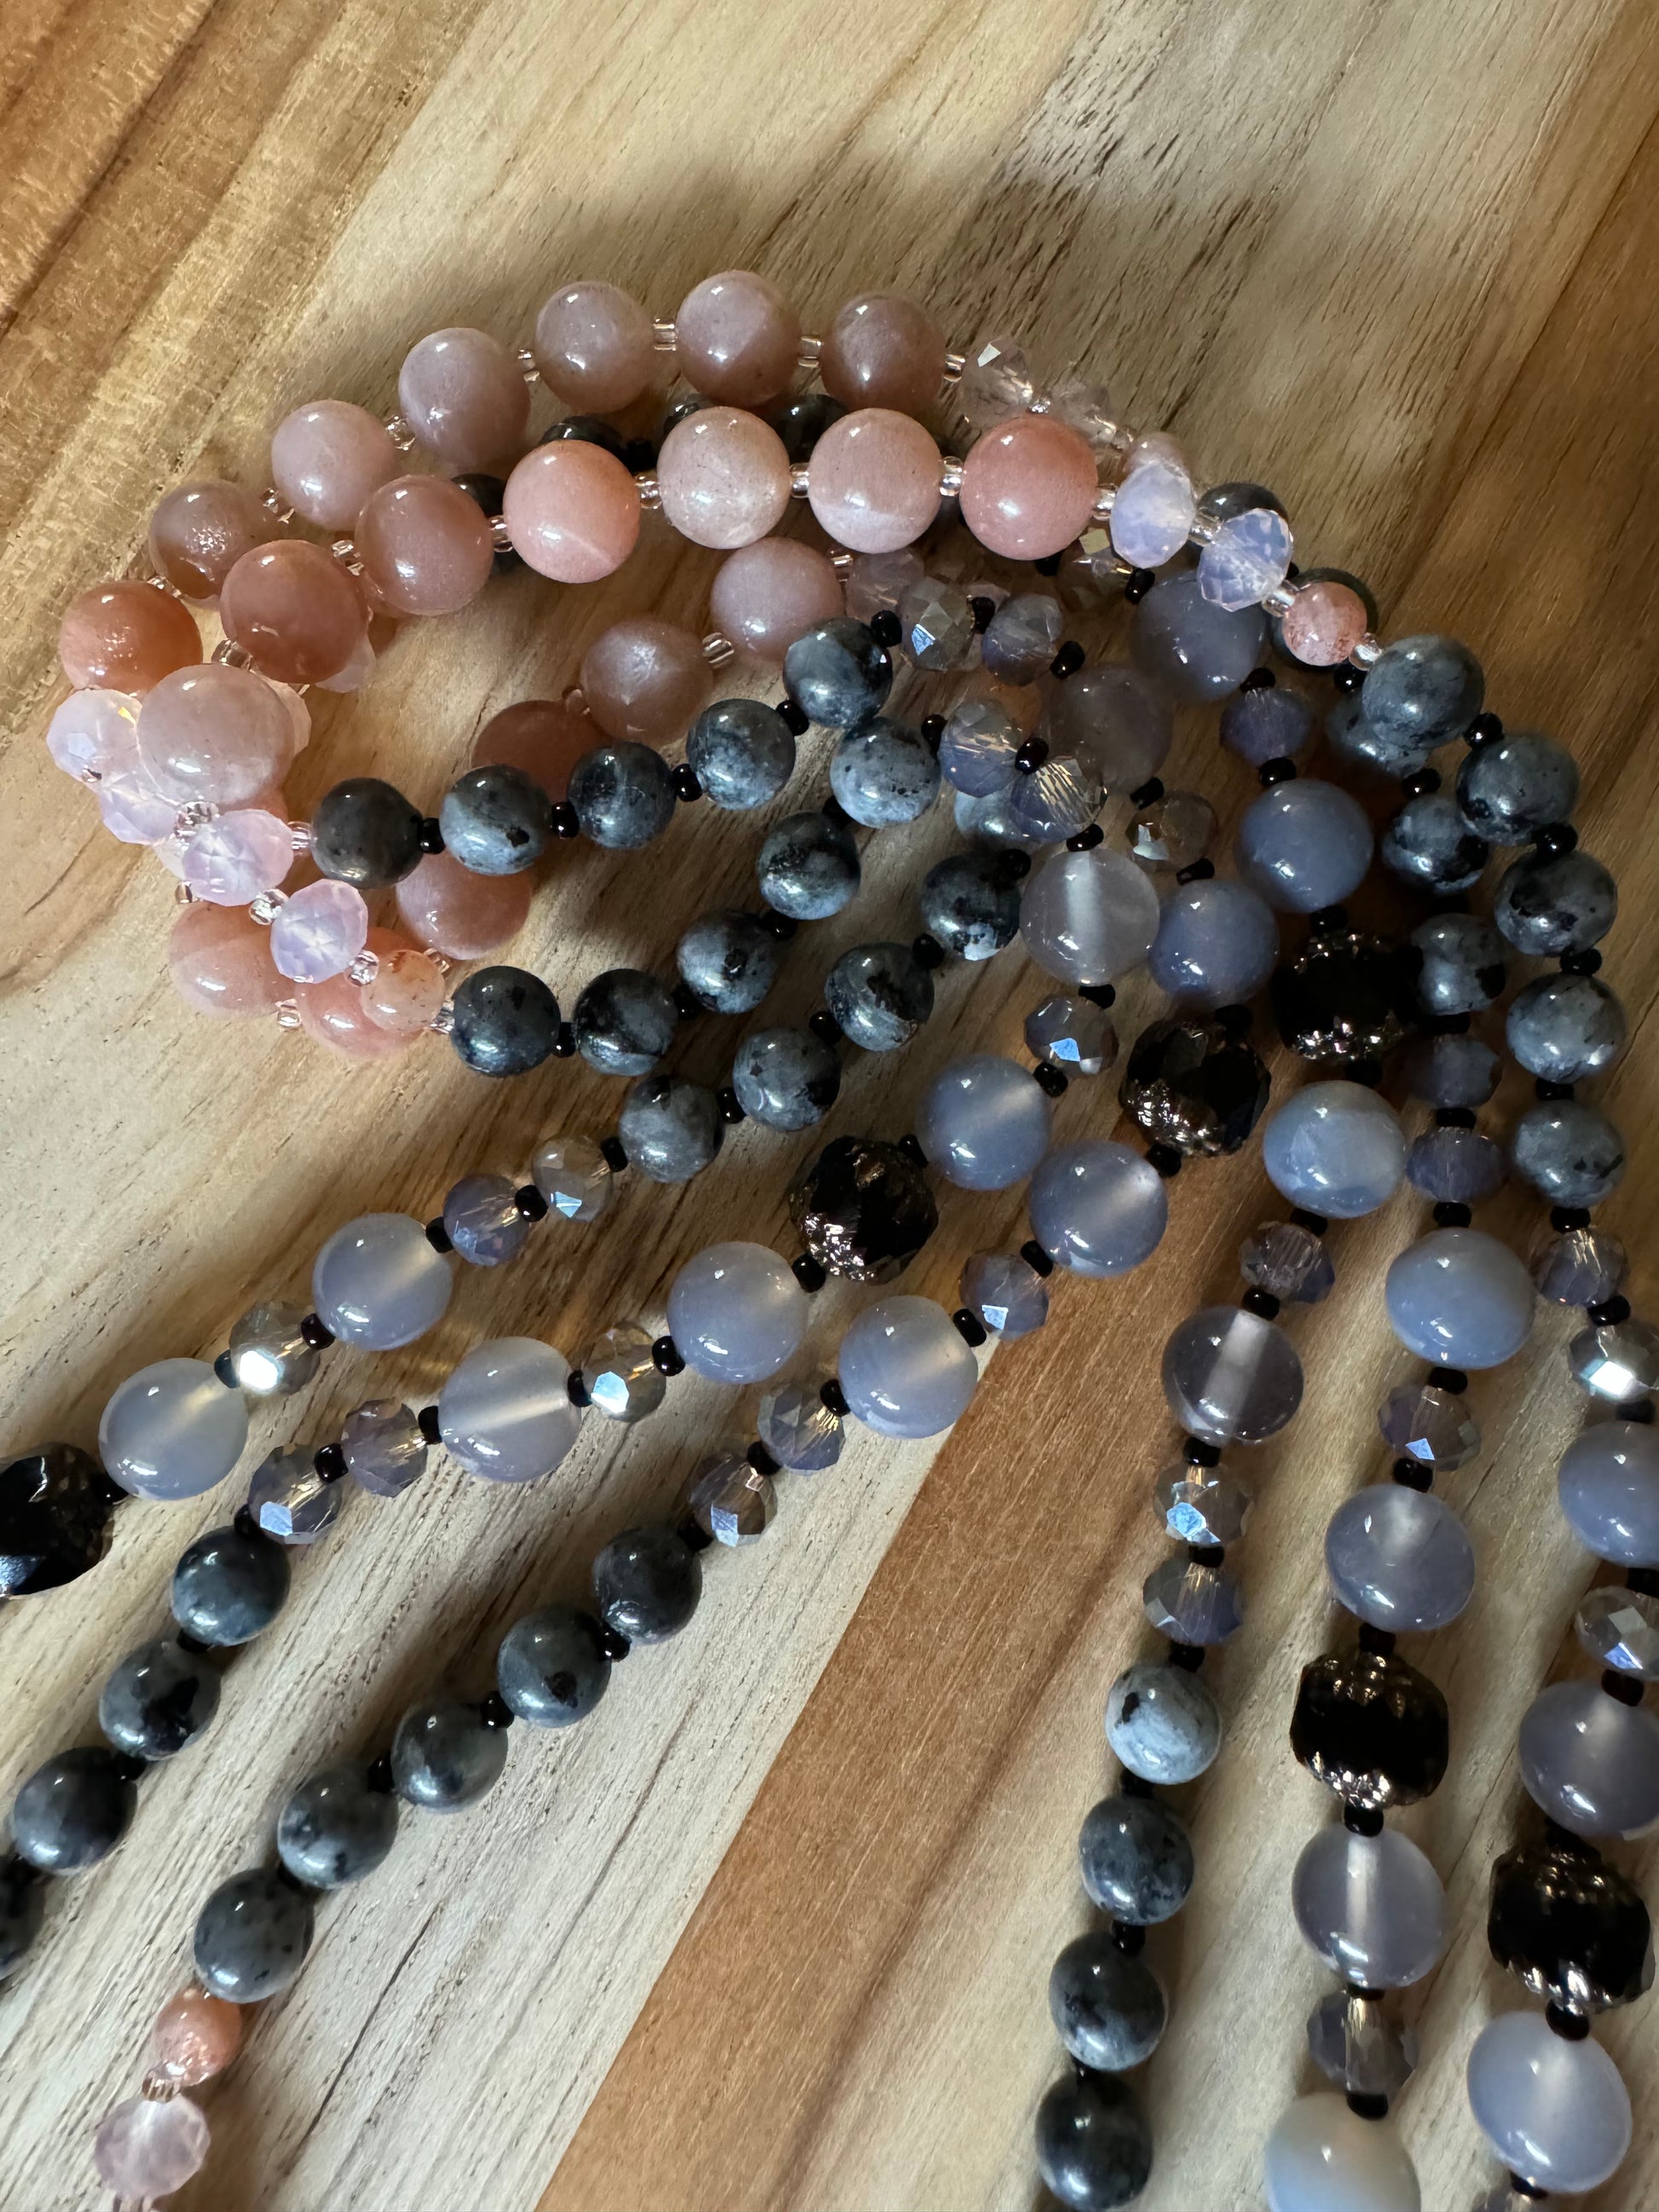 60” Extra Long Color Block Wraparound Style Beaded Necklace with Peach Sunstone Grey Agate Larvikite Black Czech Glass and Crystal Beads -My Urban Gems